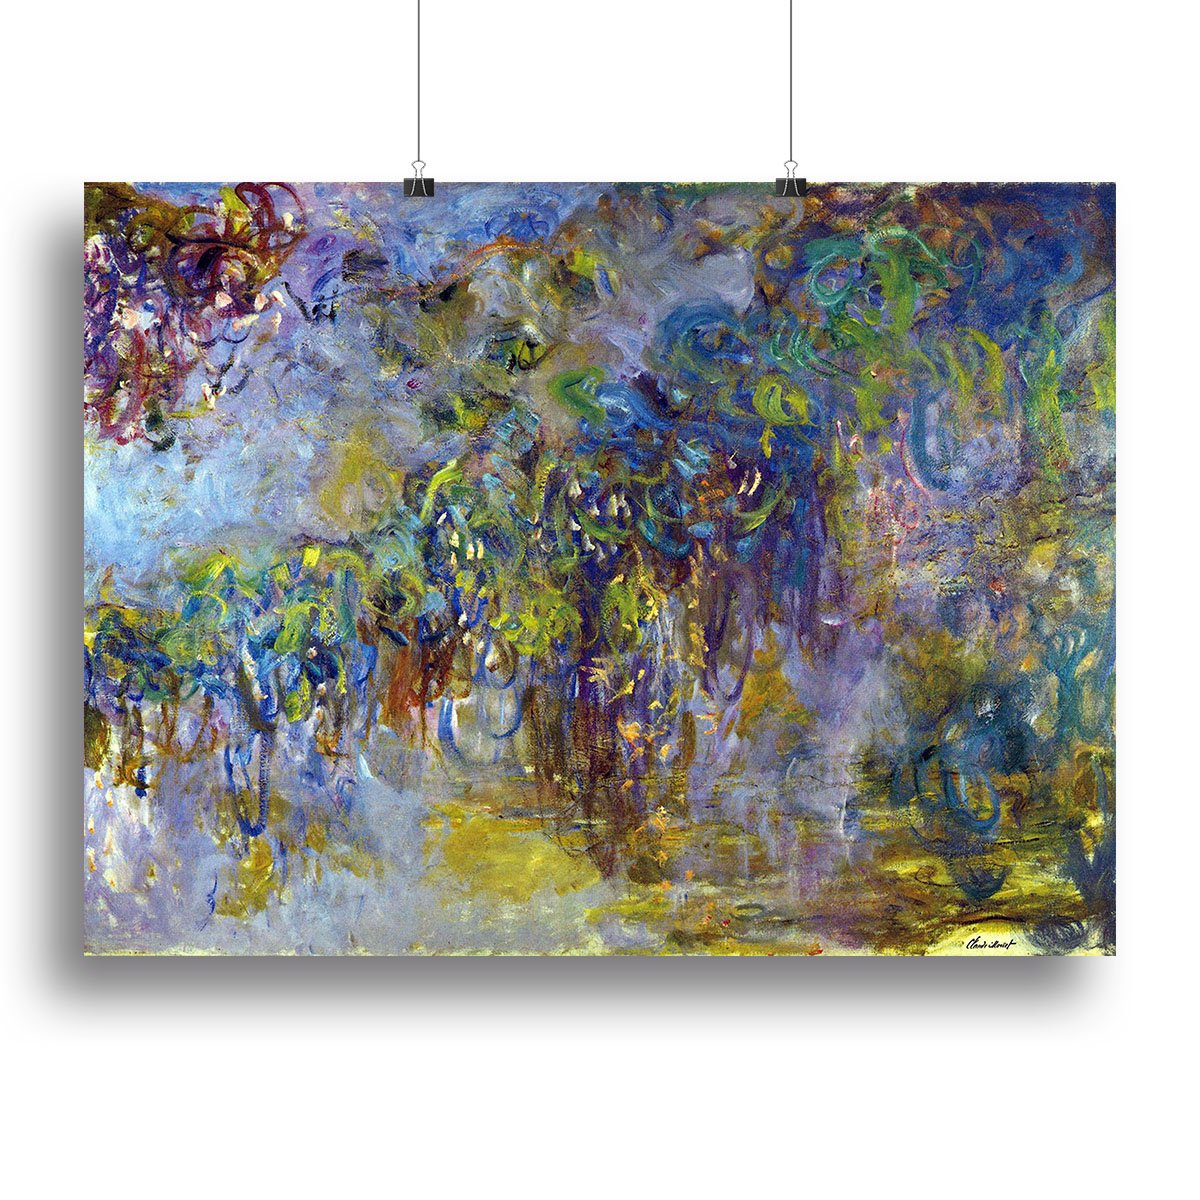 Wisteria 2 by Monet Canvas Print or Poster